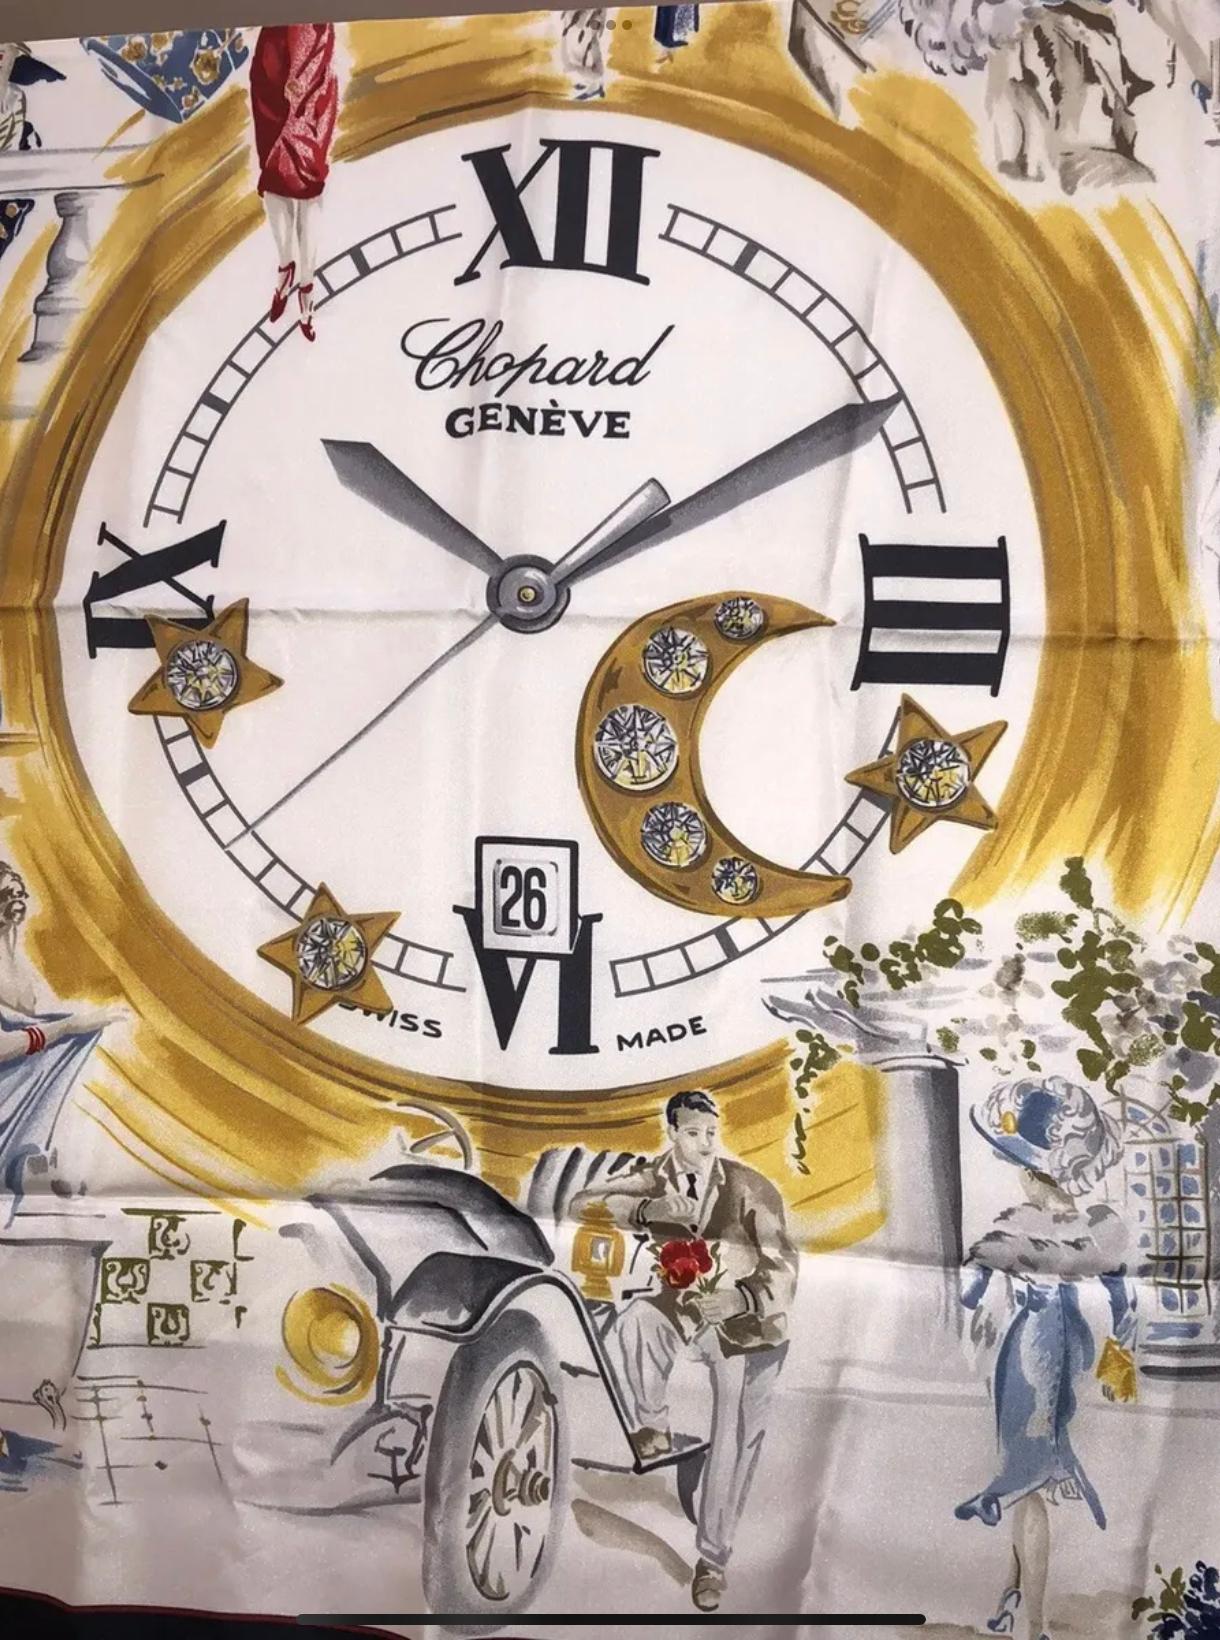 Chopard Geneva Silk Scarf Daily People & Cars Art W/ Gold Chopard Watch Face was a Concours d’Elegance Promo item and is New in Box

Made in Italy 100% Silk

90cm Square Scarf. New in Box

Foxy Couture is not an authorized reseller nor affiliated